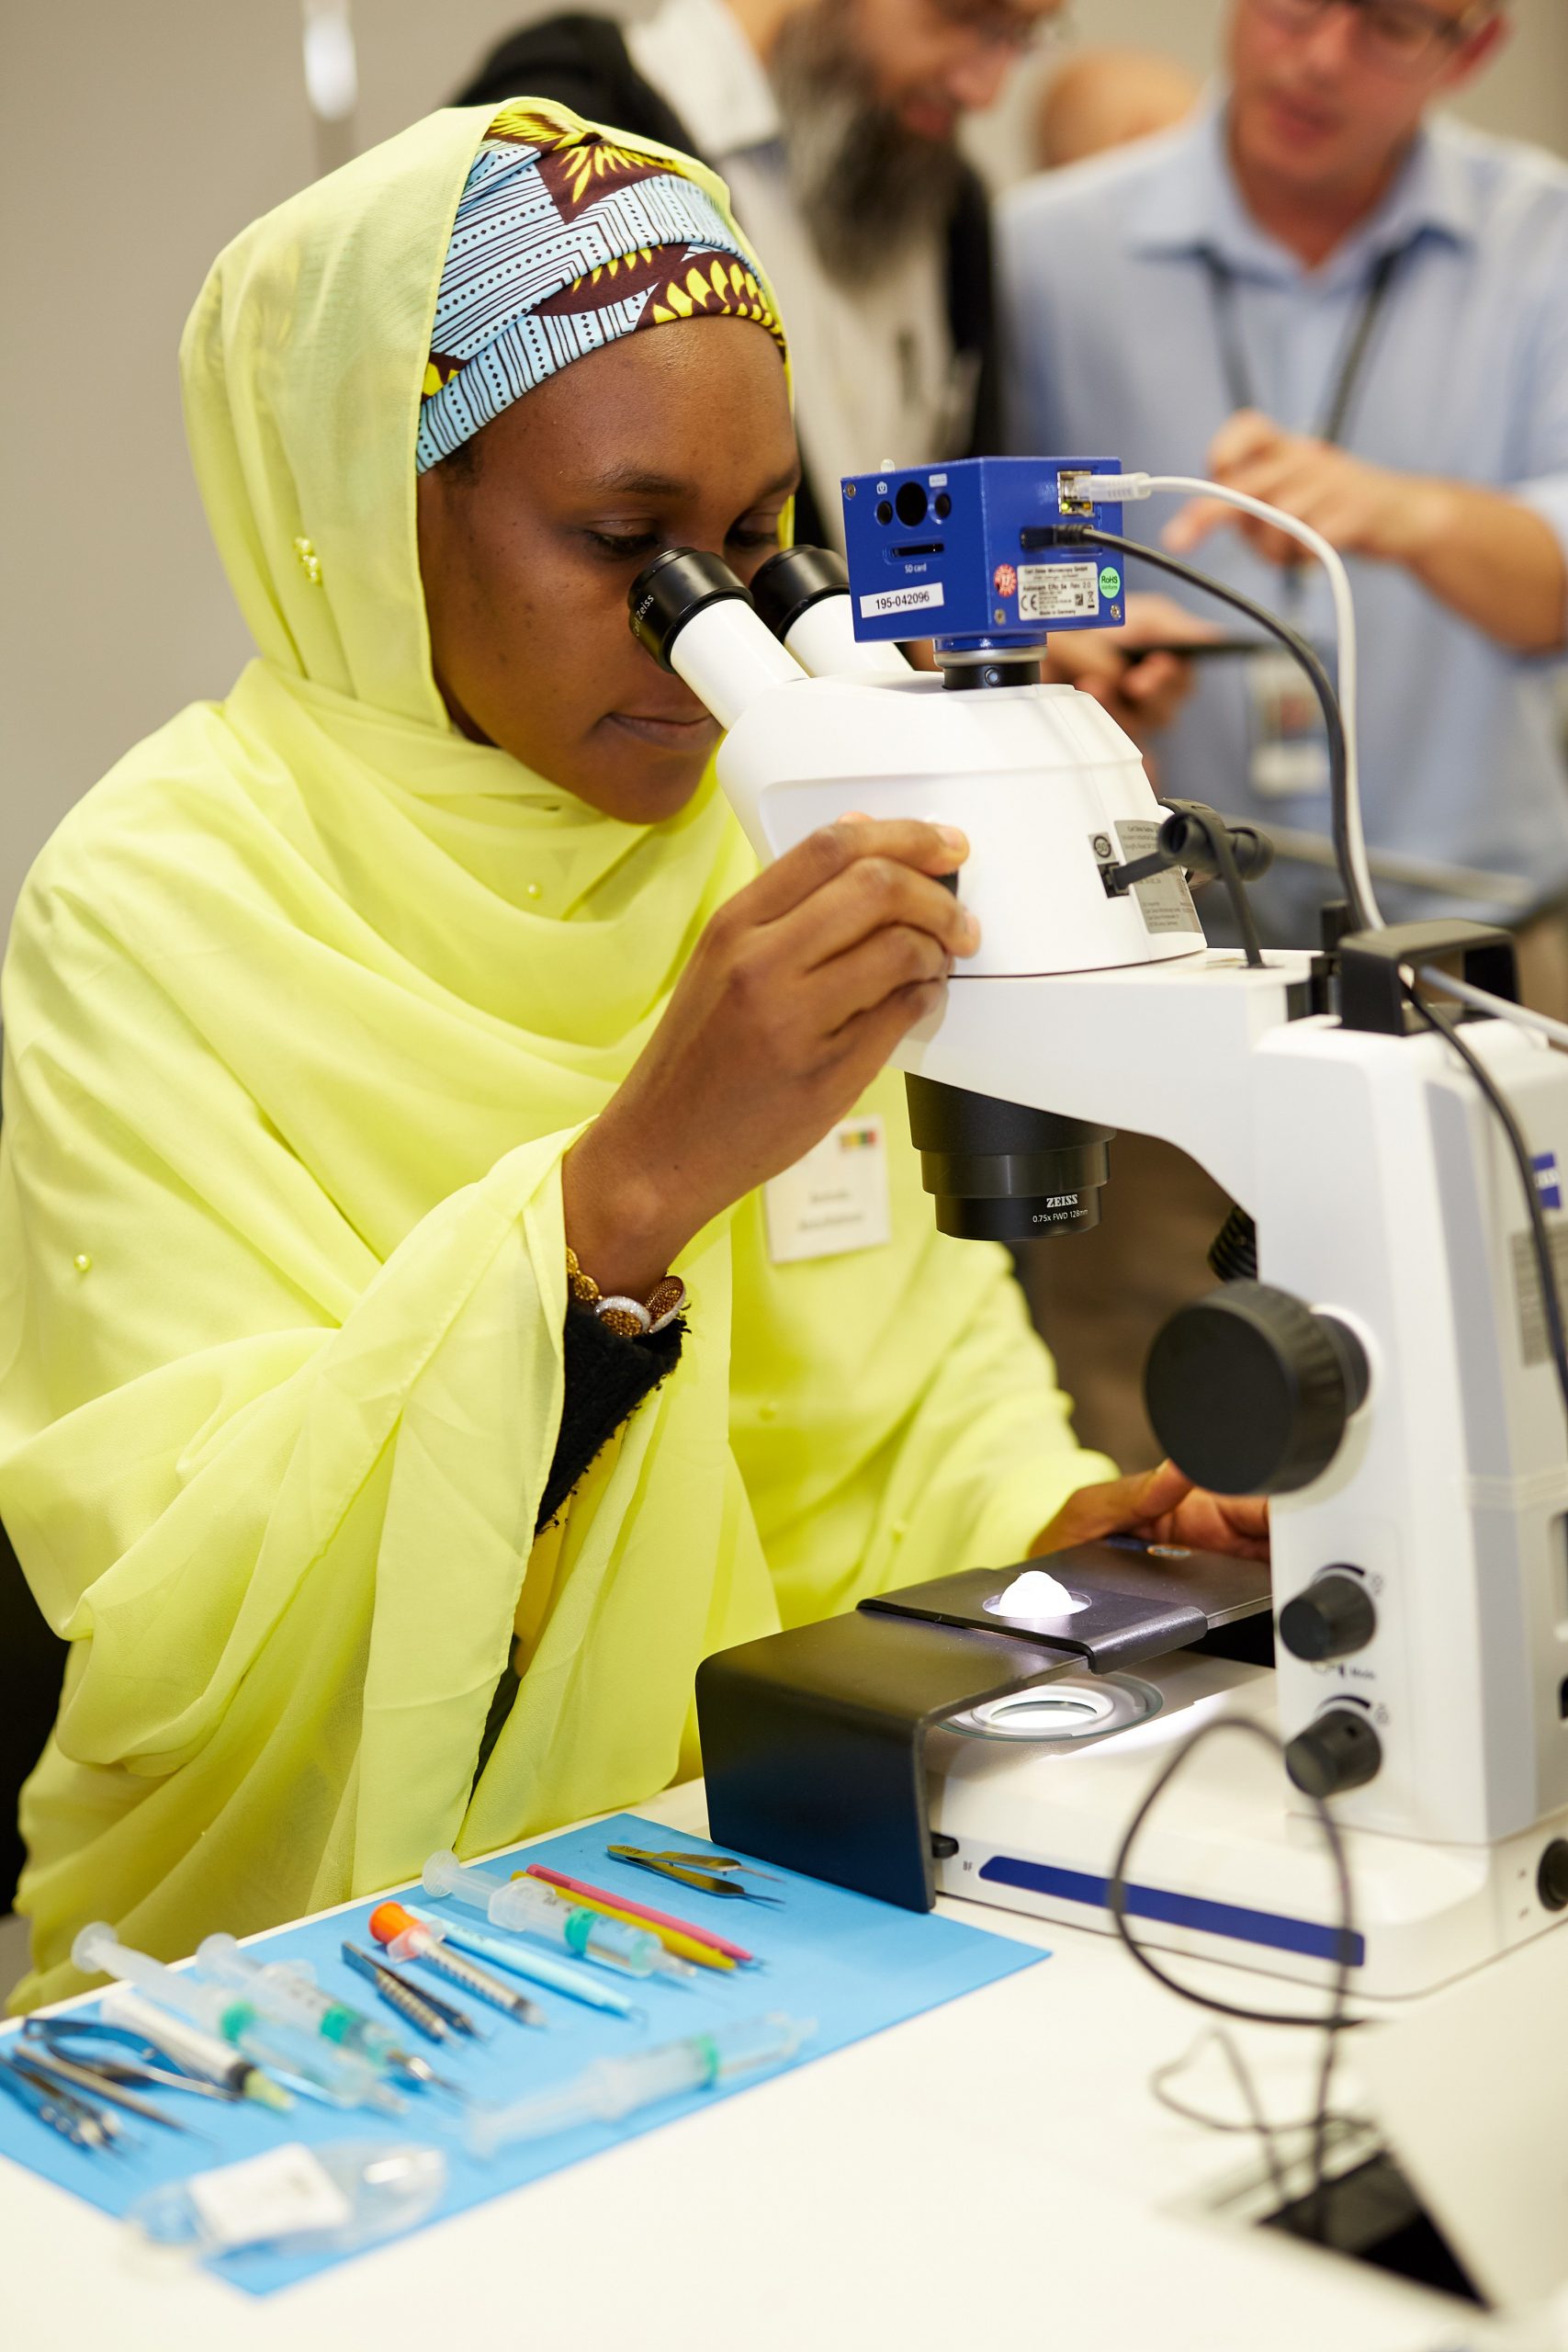 A woman in a yellow hijab uses a microscope during a surgical skills training day